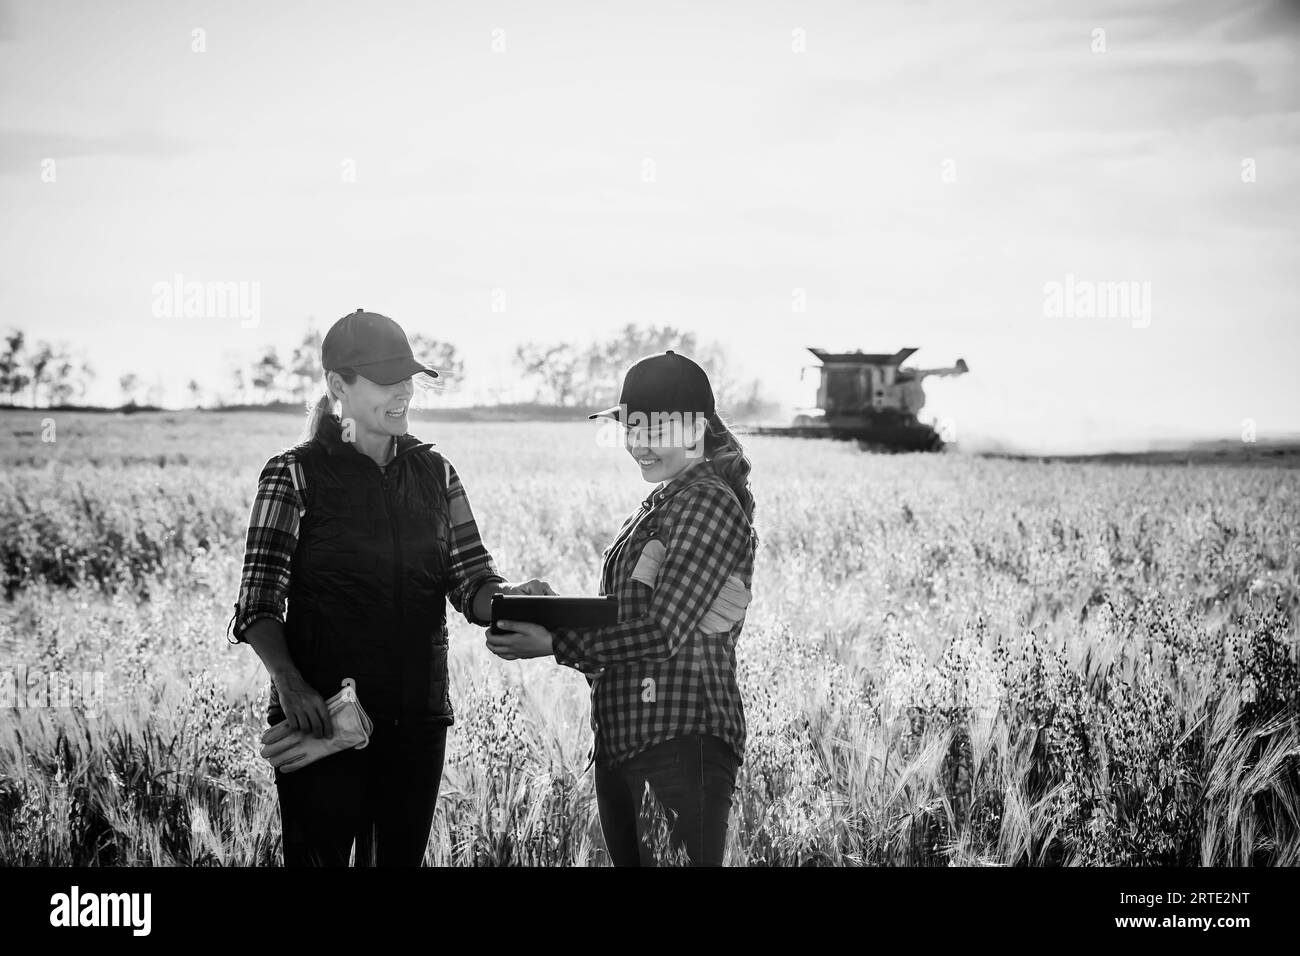 A mature farm woman standing in a field working together with a young woman at harvest time, using advanced agricultural software on a pad, with a ... Stock Photo